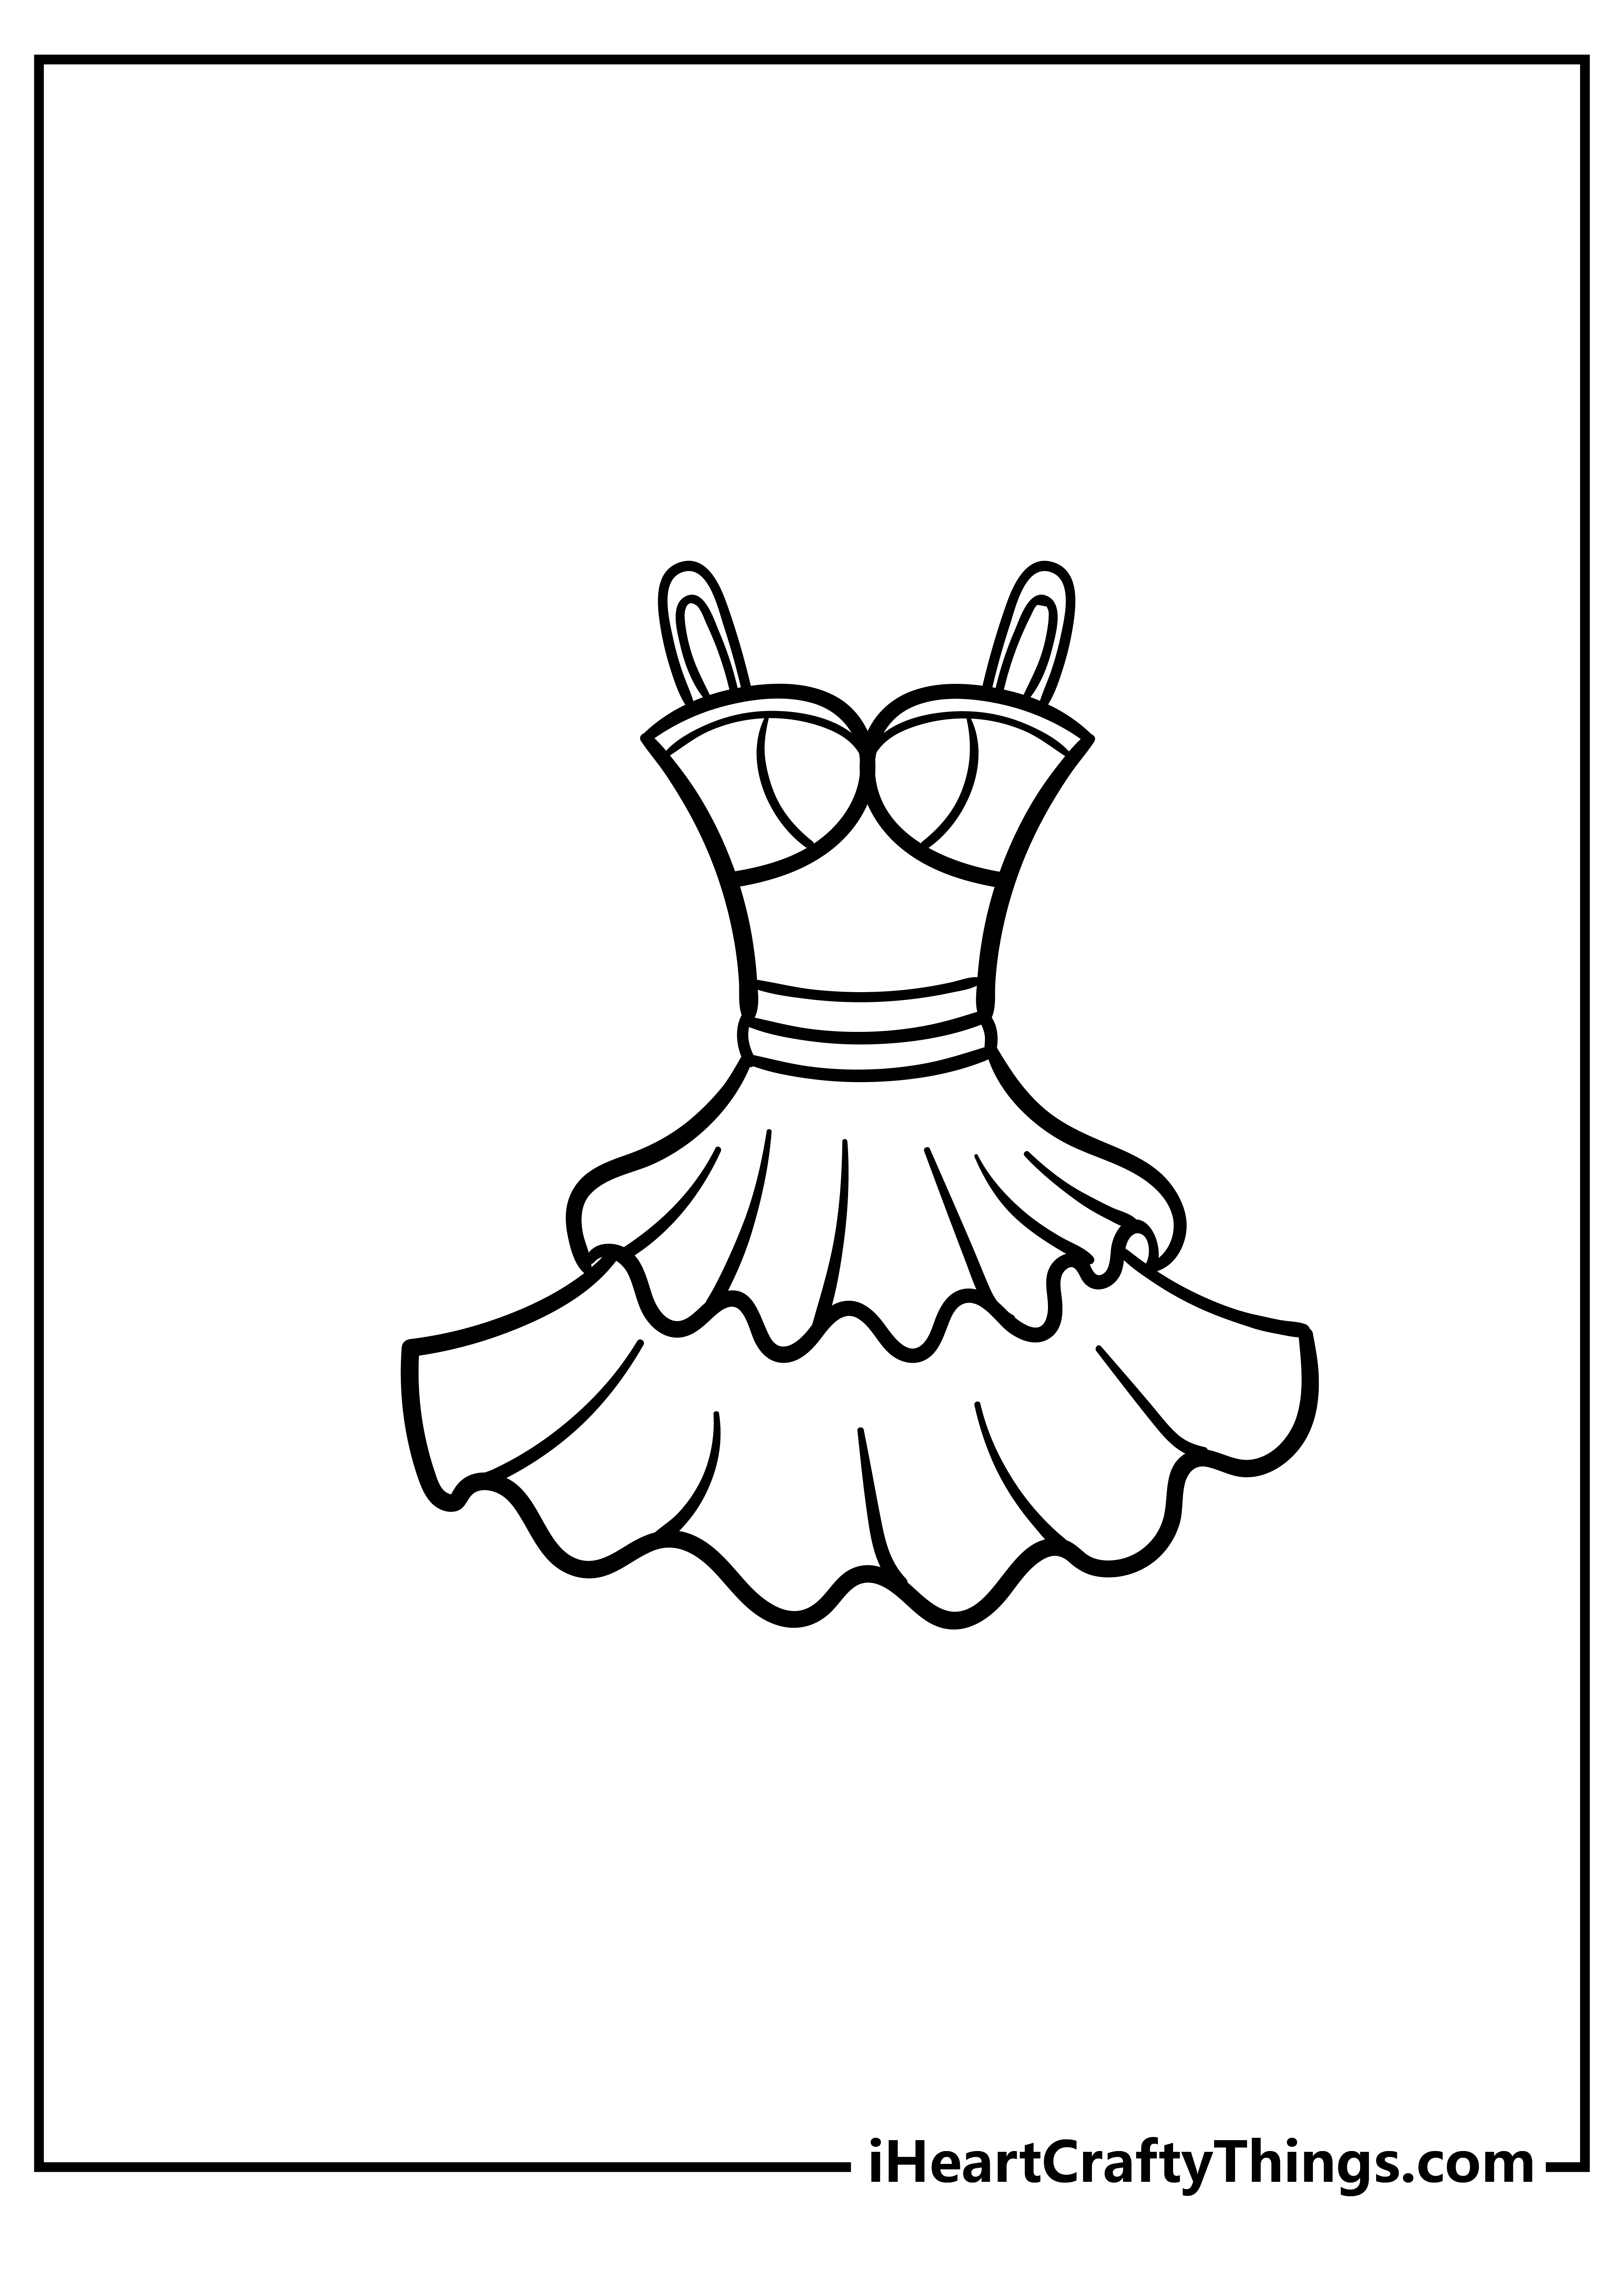 Dress Coloring Sheet for children free download